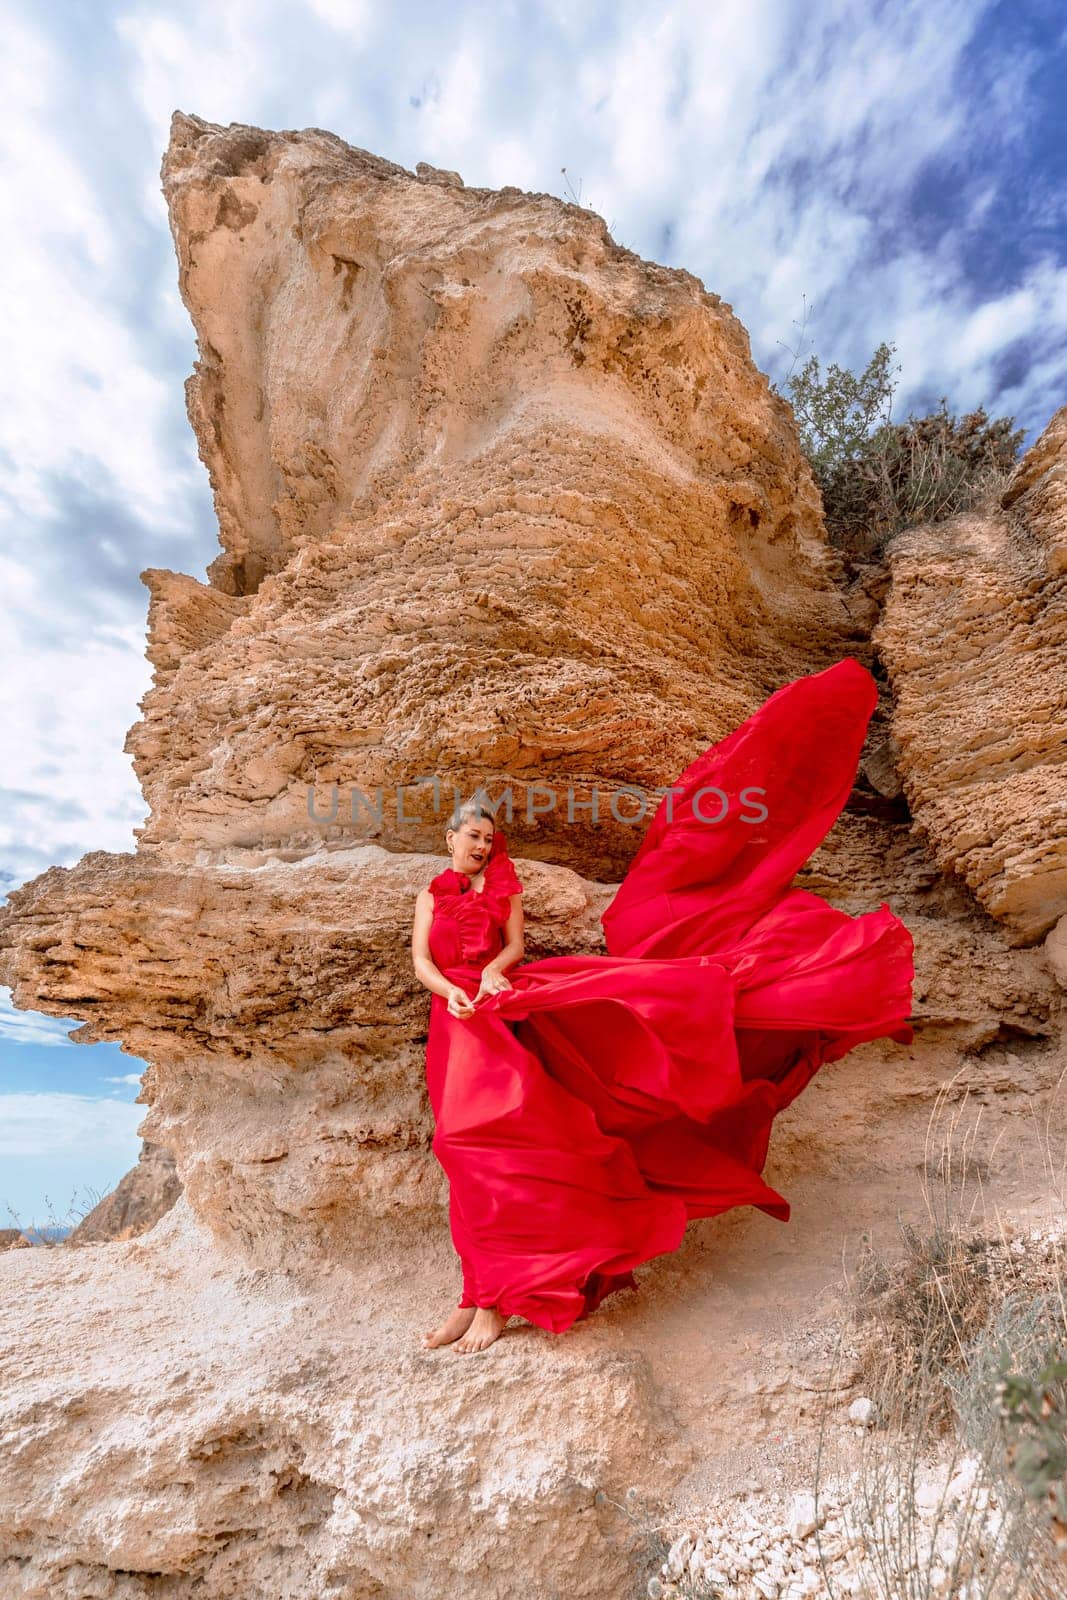 A woman in a red silk dress stands by the ocean, with mountains in the background, as her dress sways in the breeze